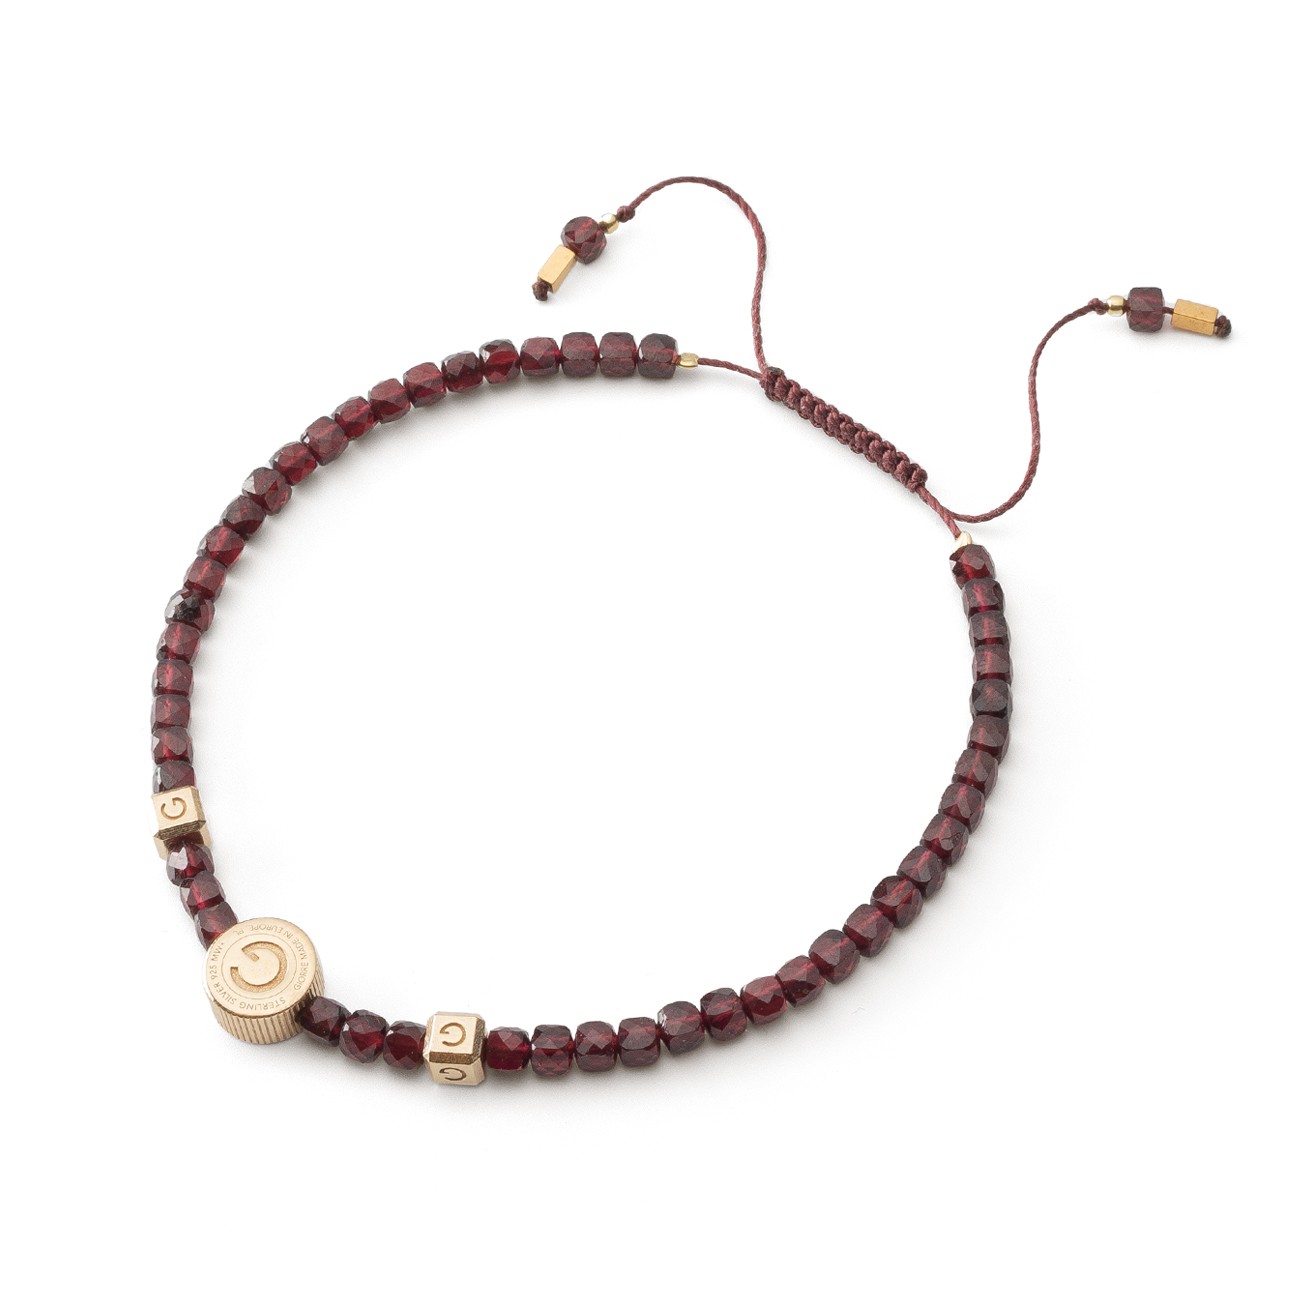 Silver anklet with natural stone - garnet